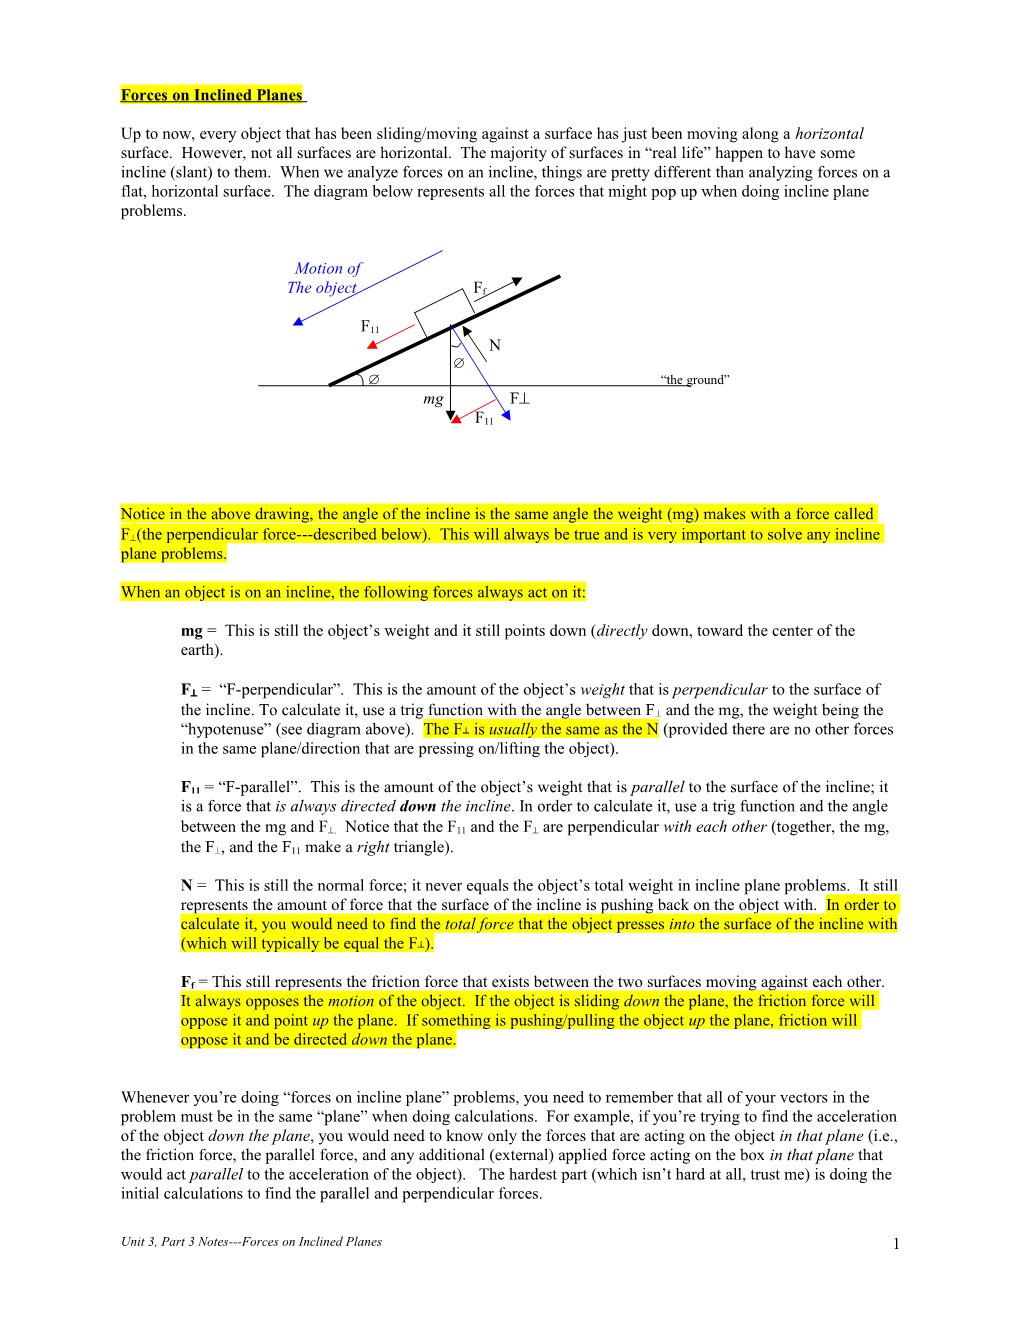 Unit 2 Part 3 Forces on Inclined Planes Notes